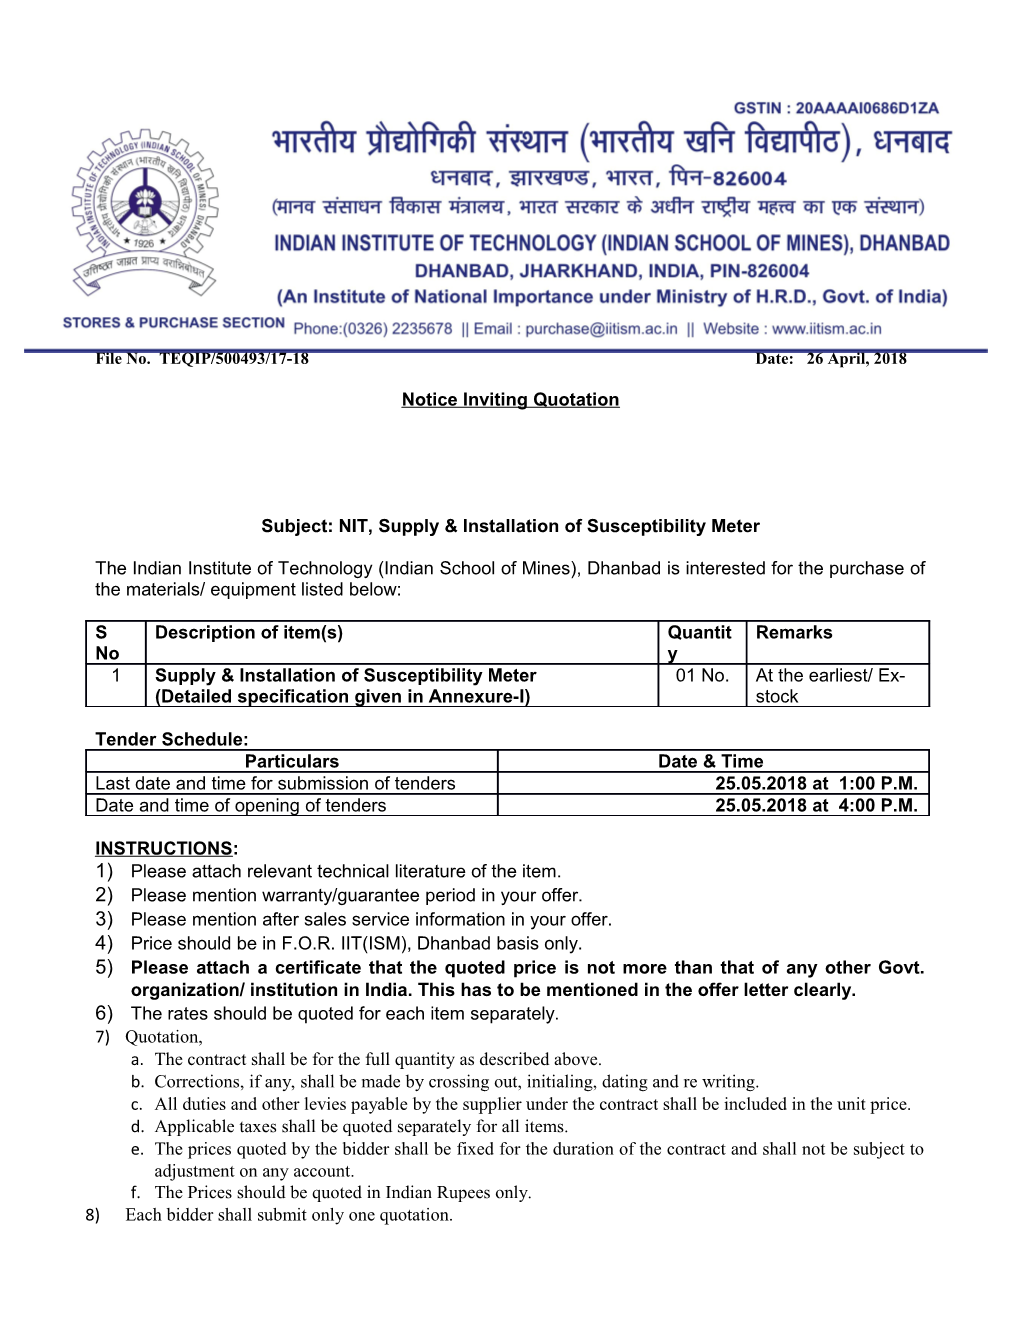 Subject: NIT, Supply & Installation of Susceptibility Meter